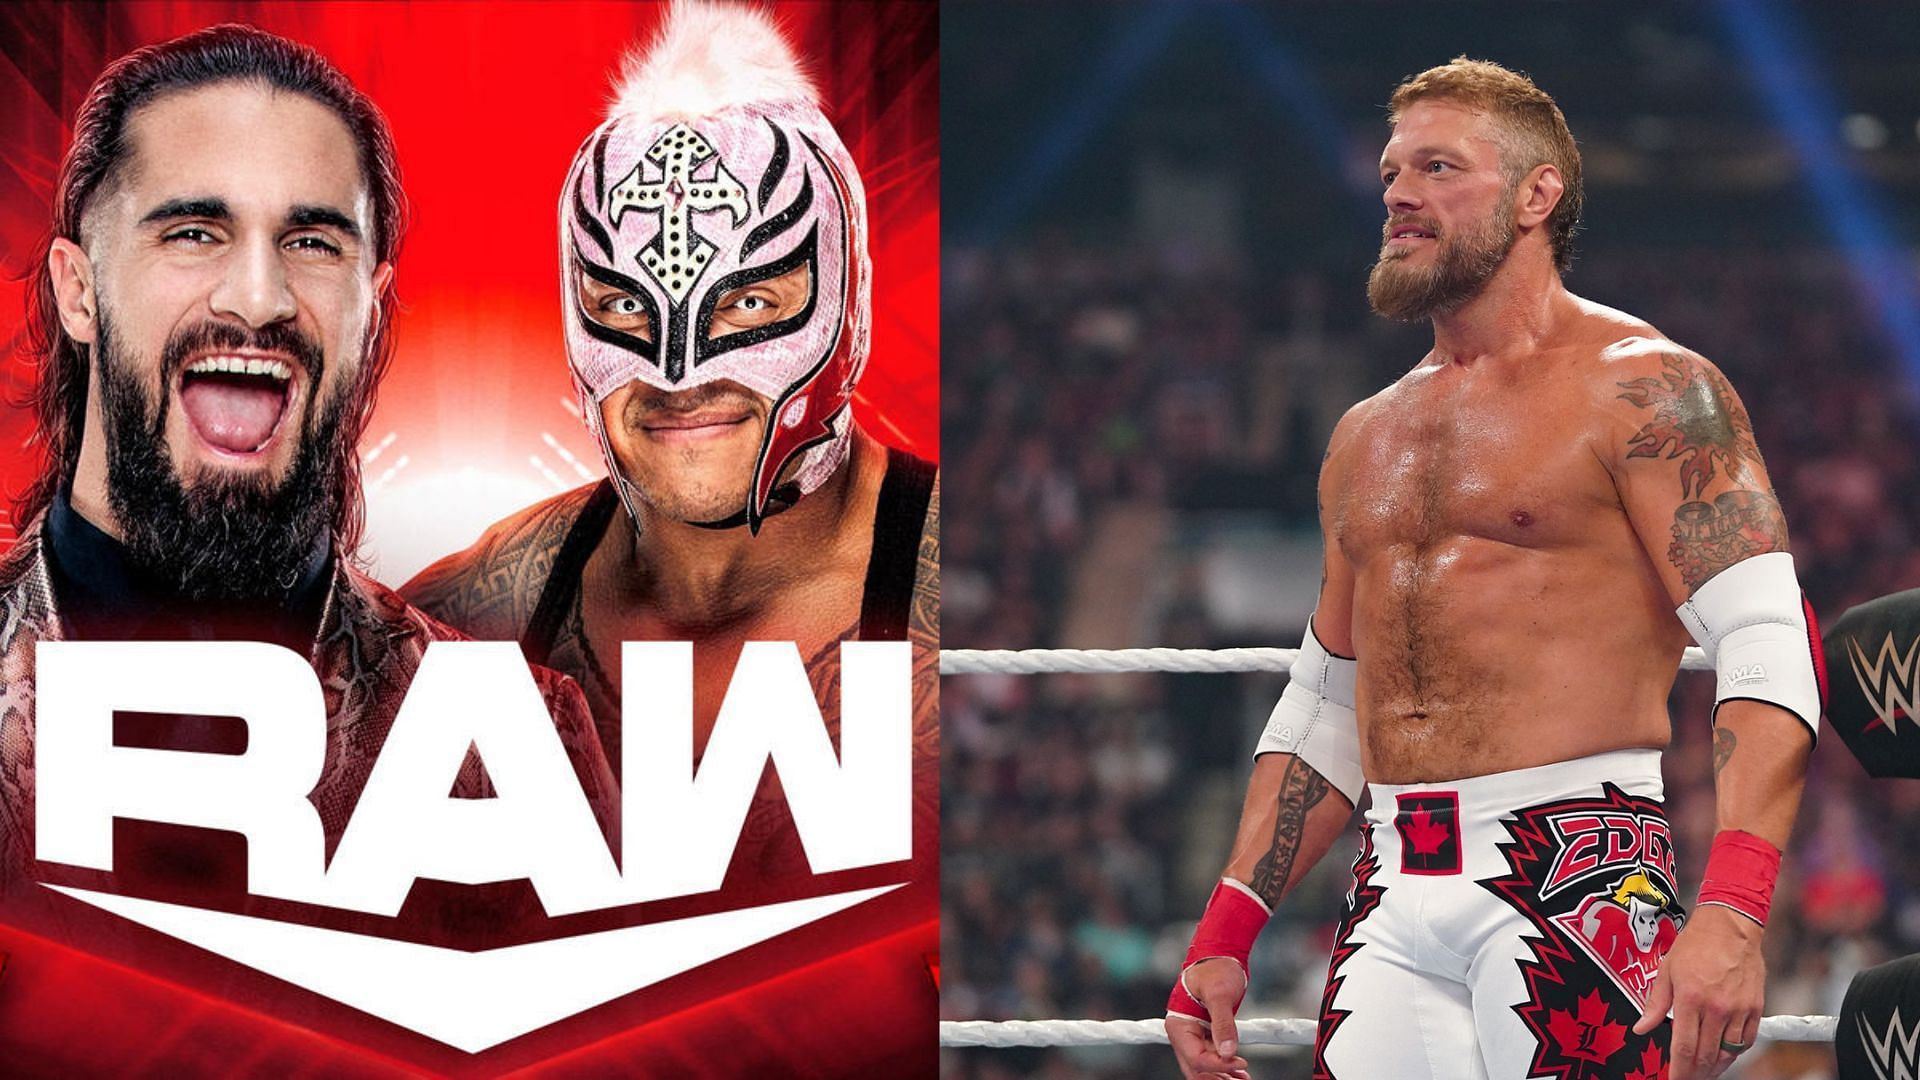 Will any surprises be in store for Seth Rollins vs. Rey Mysterio on RAW?